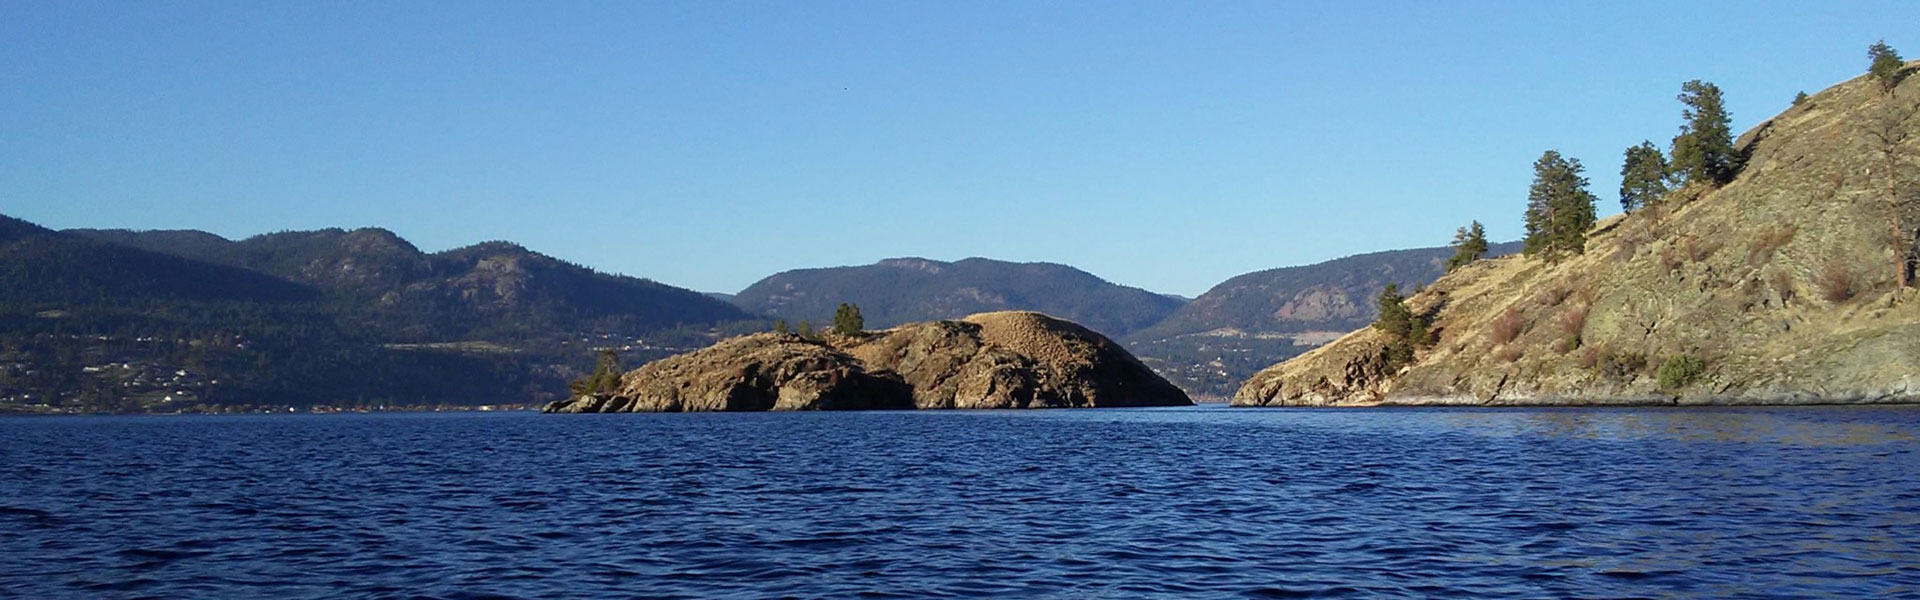 Production company Partners in Motion invited Bill Steciuk to join the in a two-day expedition searching around Lake Okanagan and two more days near Vancouver Island.